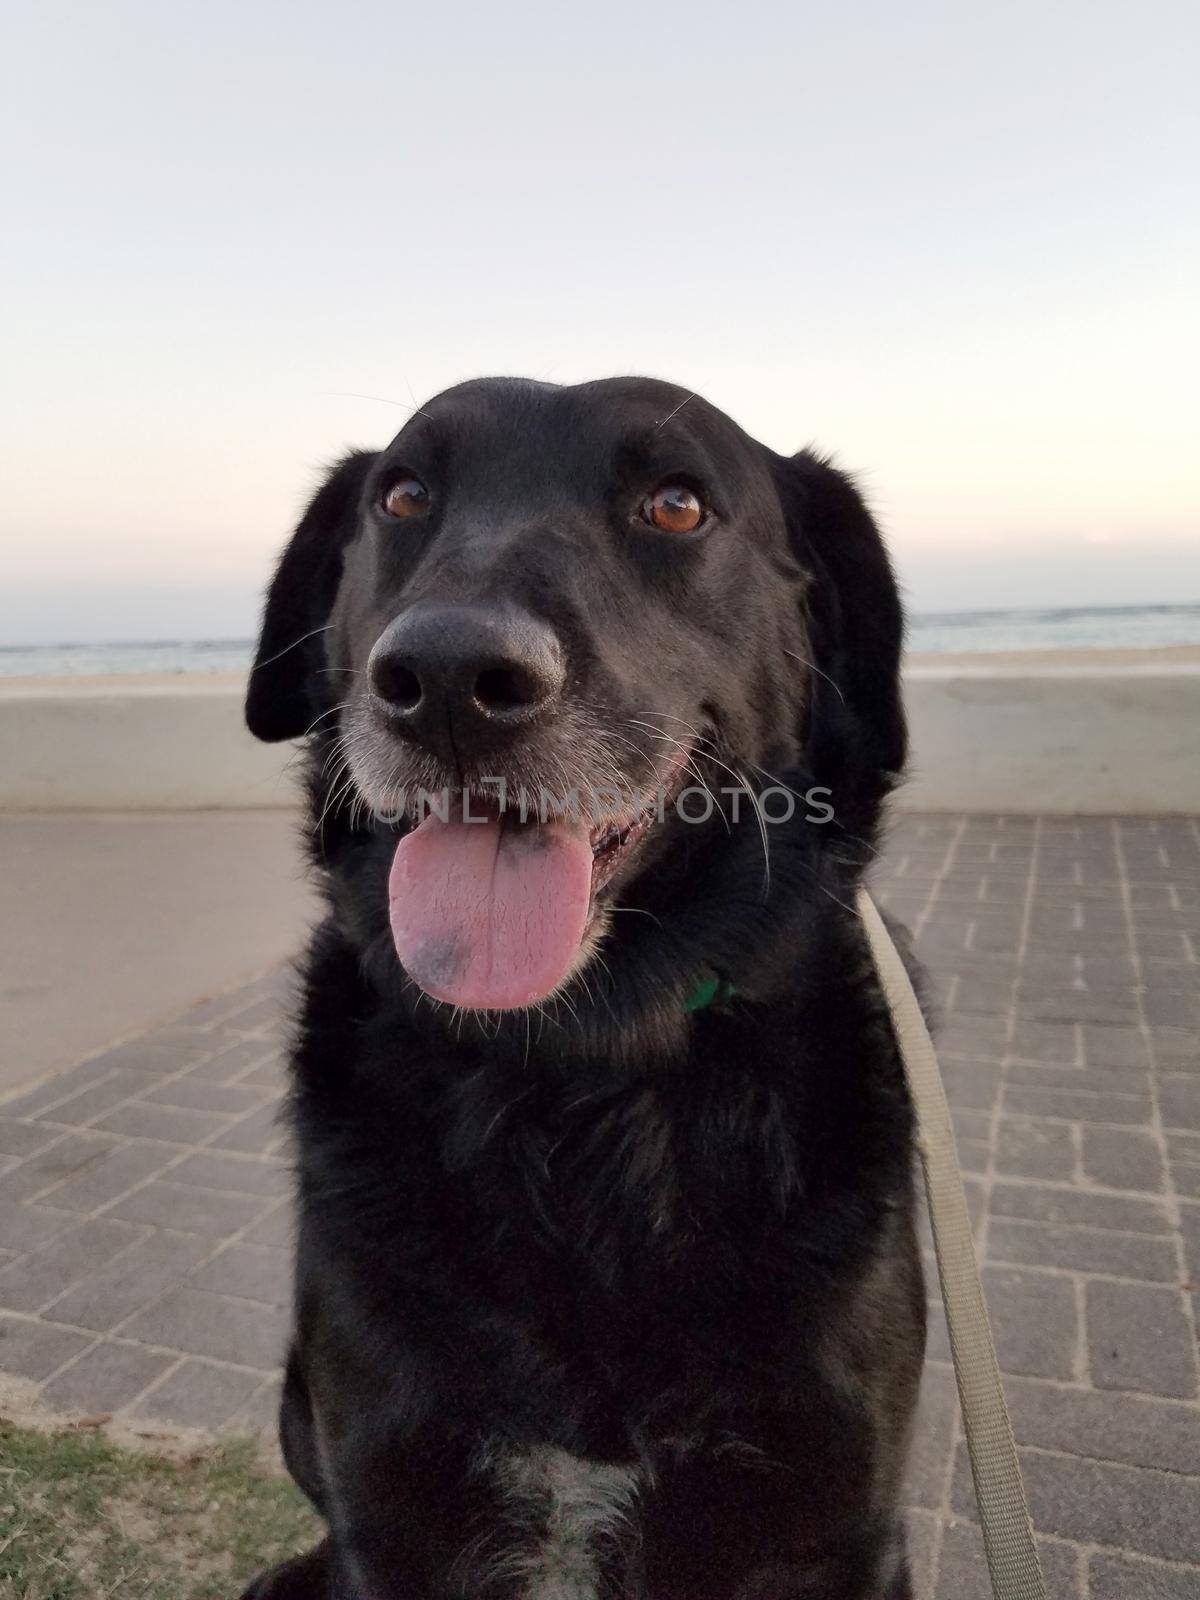 Black retriever Dog wearing a green collar on neck and tongue hanging out on beach at dusk with view of Pacific ocean off coast of Oahu, Hawaii.